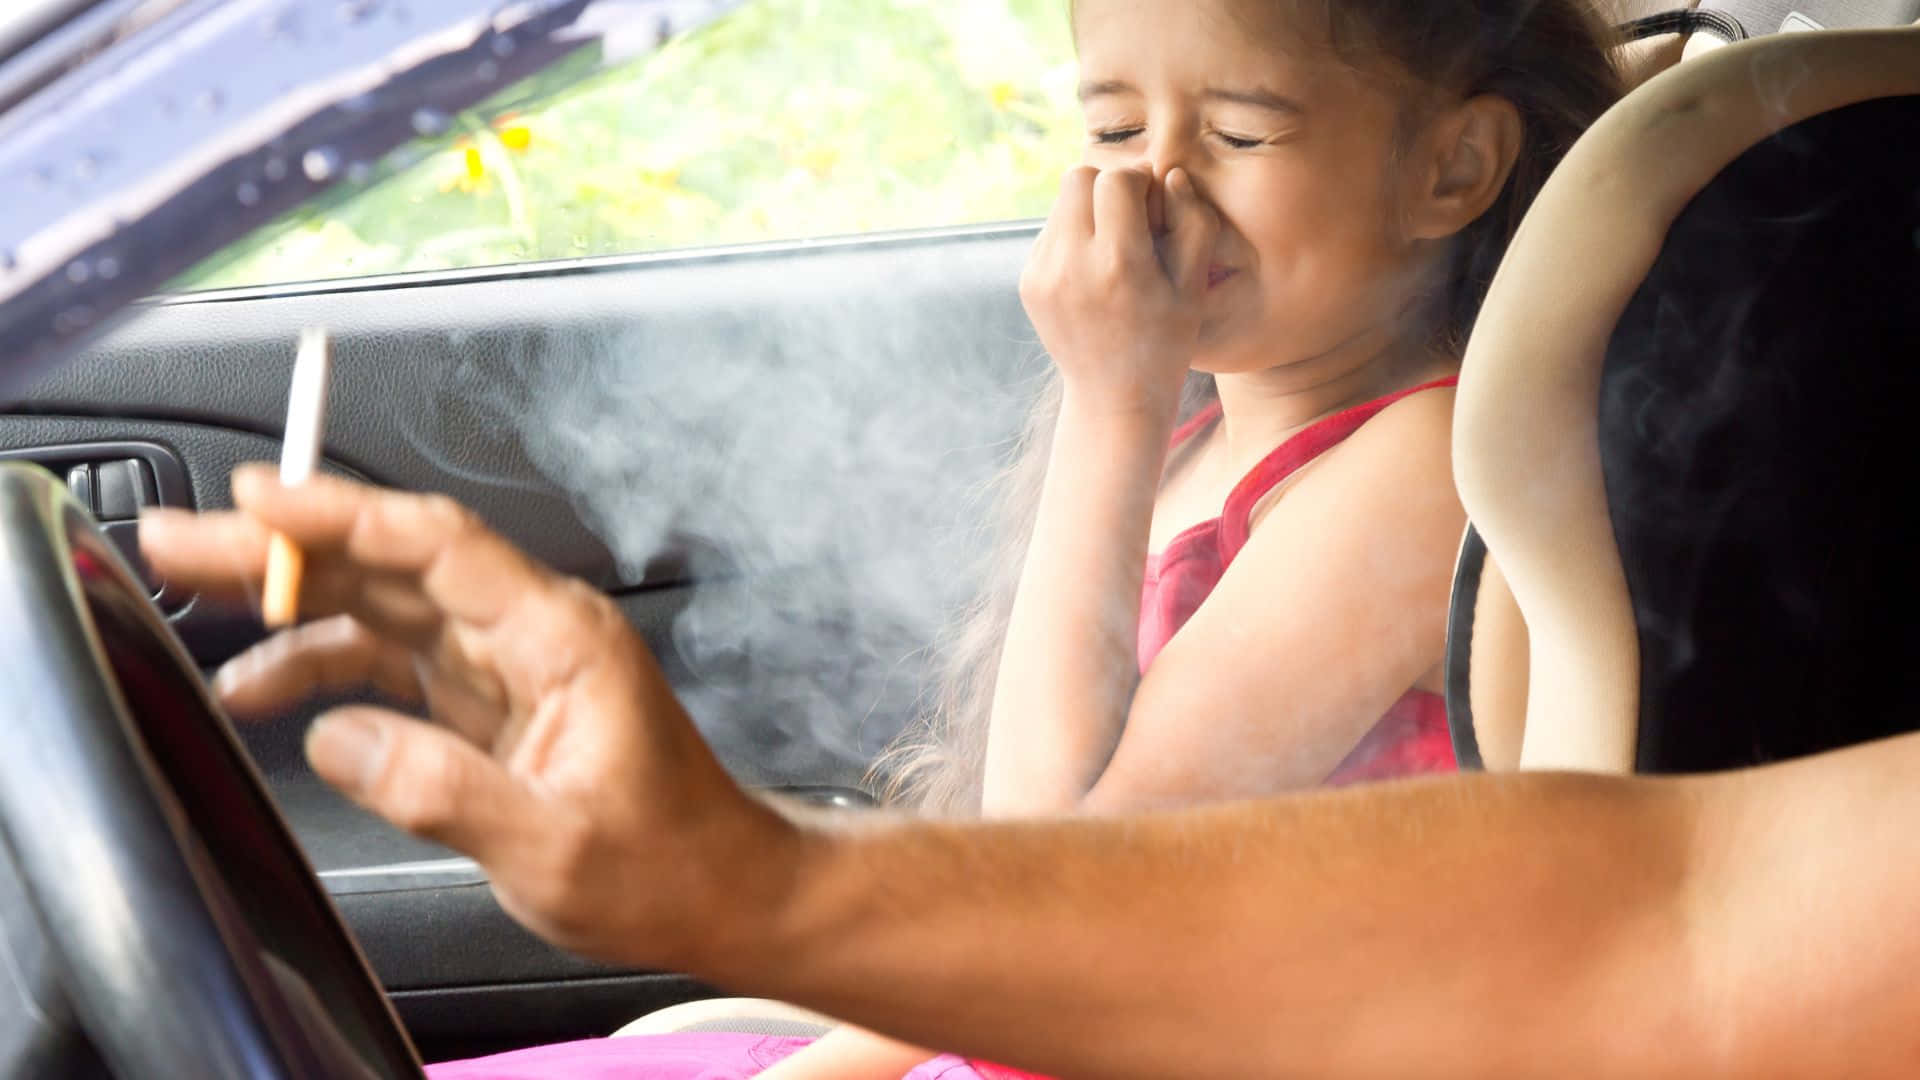 A Girl Is Smoking A Cigarette In A Car